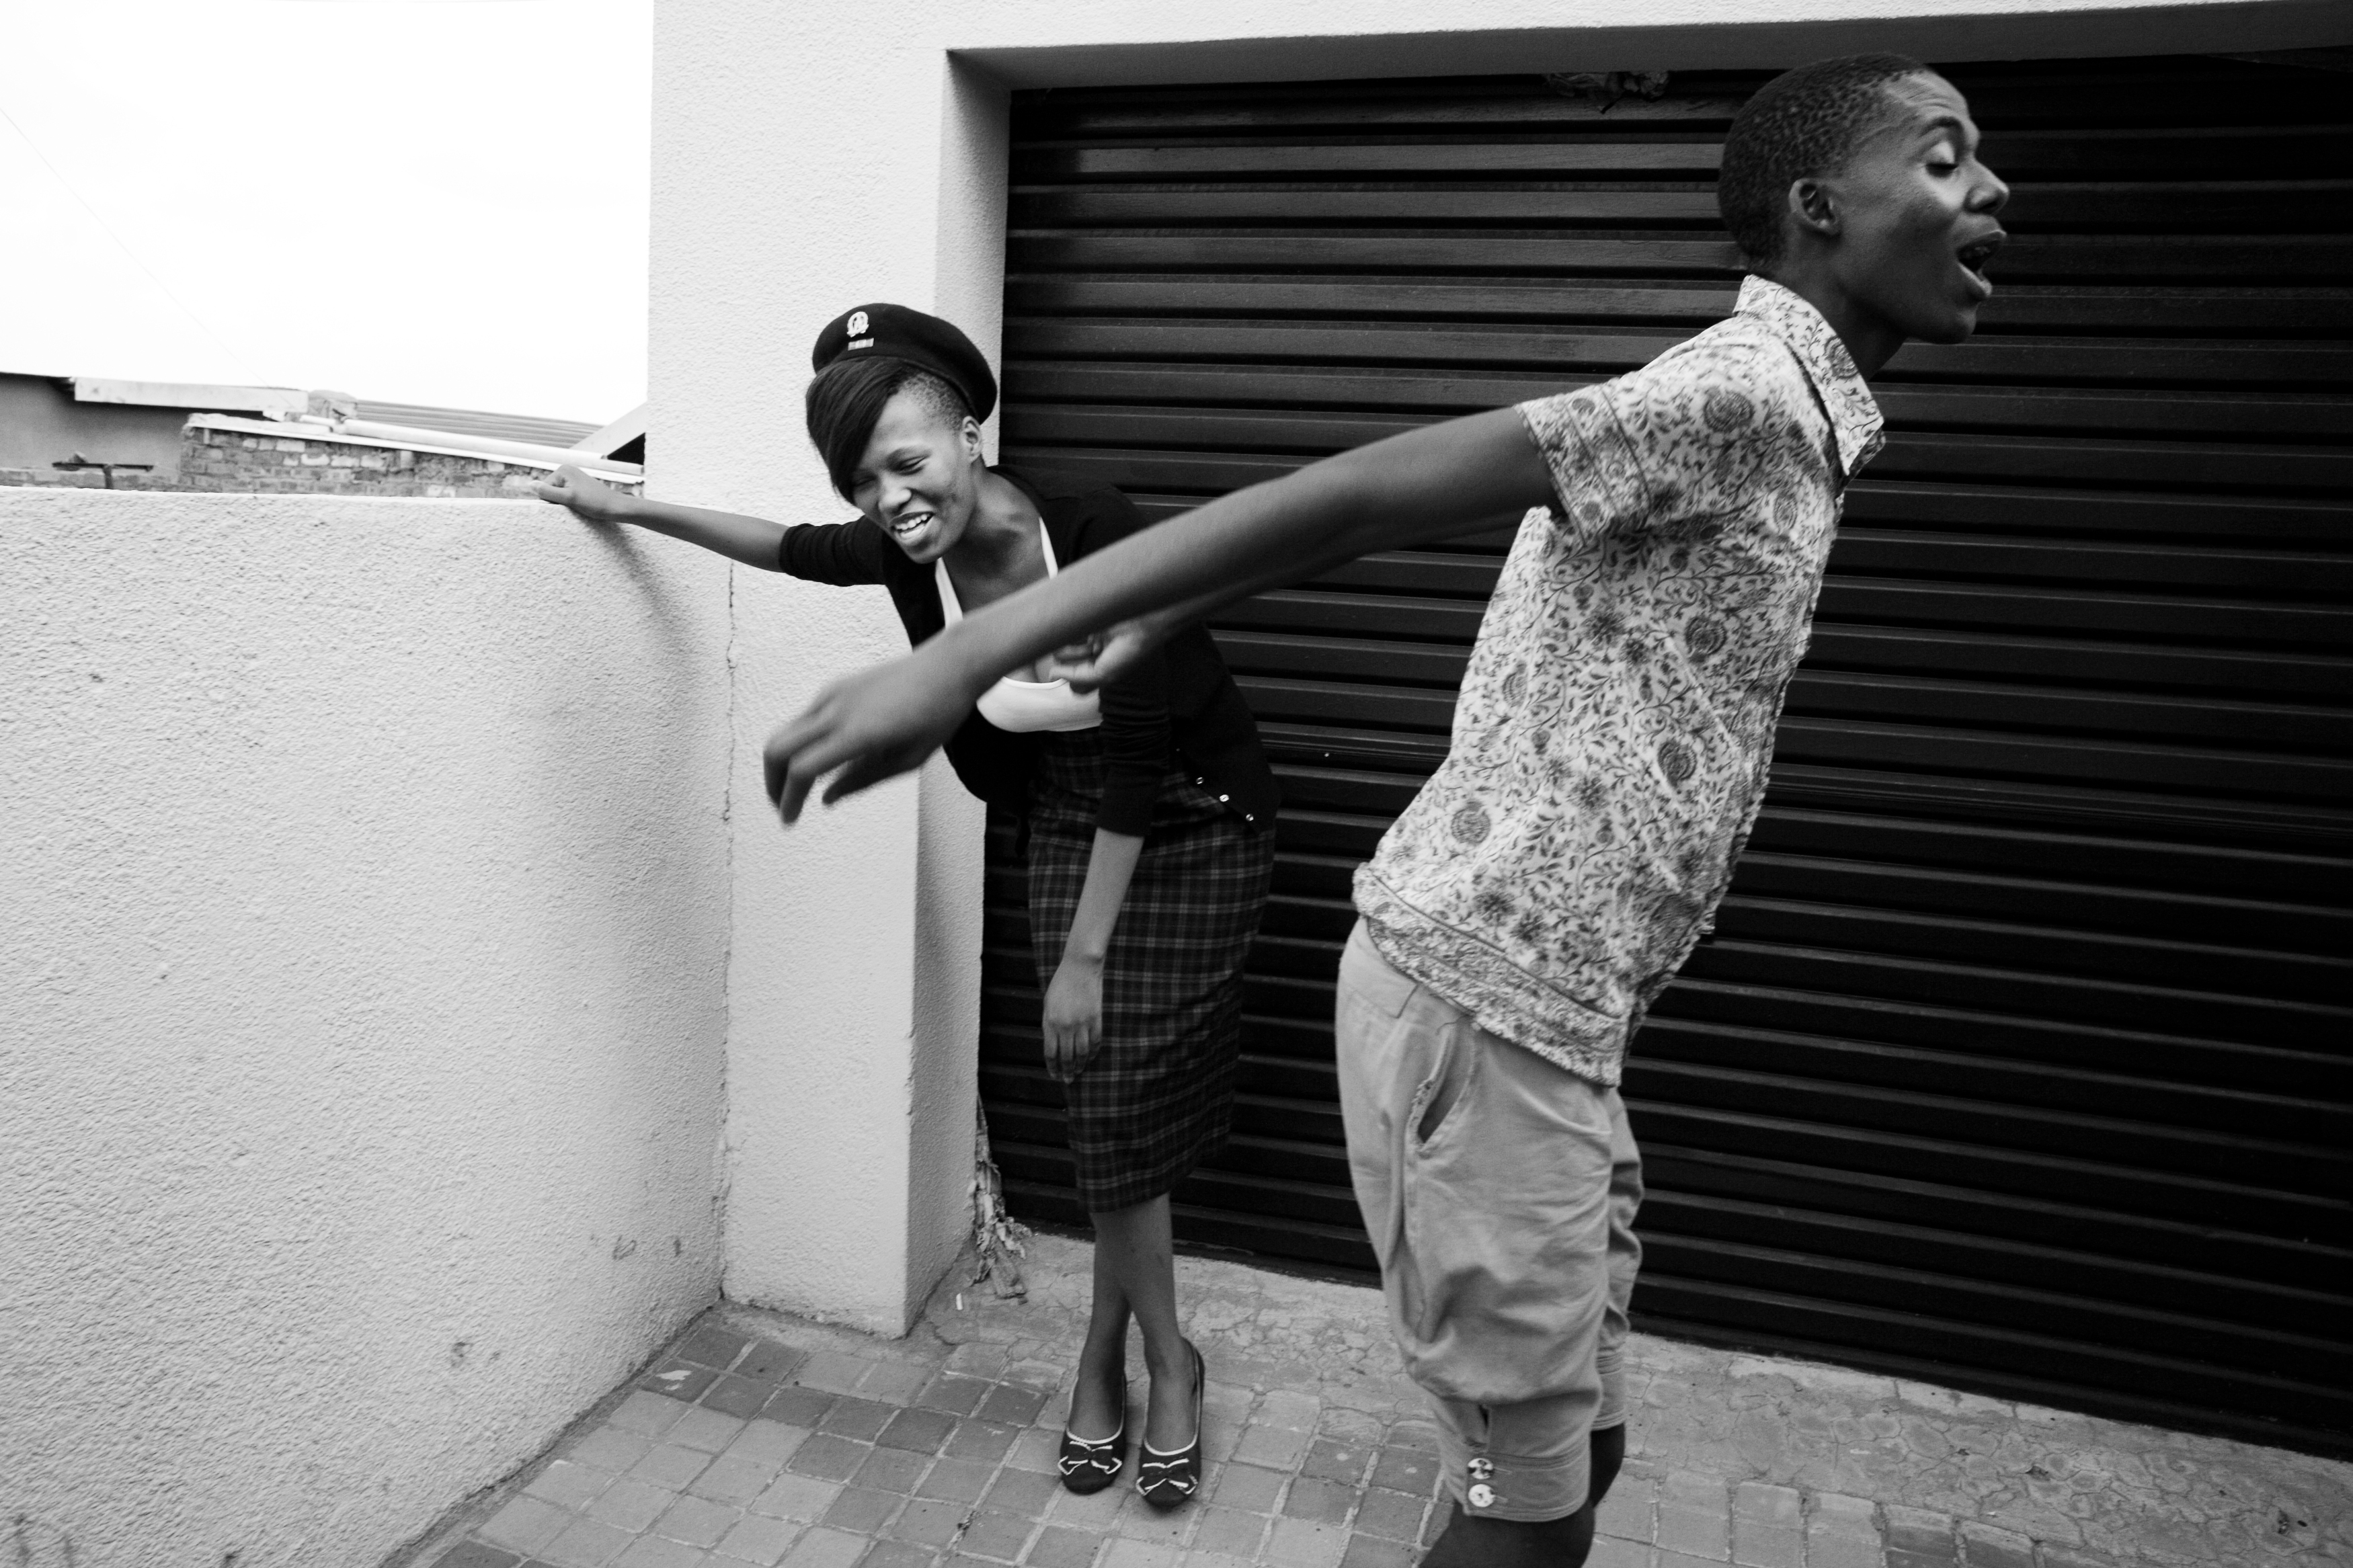 Smarteez member, Tumelo Nthekenyane, 21, right, jokes with a friend and model, left, who helps try on clothes of their new designs, outside other member Kepi's home in Soweto.Since the days of Apartheid to its inevitable end watched closely by the world, South Africans have fought hard for collective change. This collective spirit can be seen within the community in both the politics and the arts. Since the early post-Apartheid days, Kwaito—a musical genre and culture emerging out of the South African townships—has told stories beyond just the fashion and style of dance, but also to a life impoverished and the collective spirit of the young, sexual, and free looking towards change.Today, many middle class youth will argue whether Kwaito is dead or has just evolved. But one thing is certain: the new rising middle class youth of South Africa have begun to search for expression in more individual ways. Fighting a different fight from their parents, this generation is taking the opportunity to find their sense of self. One influential group emerging from Soweto’s streets calls themselves the Smarteez, after a popular, colorful candy. These young fashionistas are quickly joining the ranks of a growing middle class youth, inspiring a new generation to break from tradition and express individuality through fashion, music, and art. All original Smarteez members are from Soweto and either met growing up in the same Apartheid-styled neighborhoods or attending integrated suburban schools their parents viewed as gateways to new and better opportunities. As classmates at the University of Johannesburg’s fashion school, they bonded over a shared experience of being raised in these two distinct worlds. By sharing designs and crashing elite fashion parties, they created a milieu of risk-taking that evolved into a movement whose liberating ideas resonated with youth around the country.While South Africa still has the second highest murder rate in the world, one of th